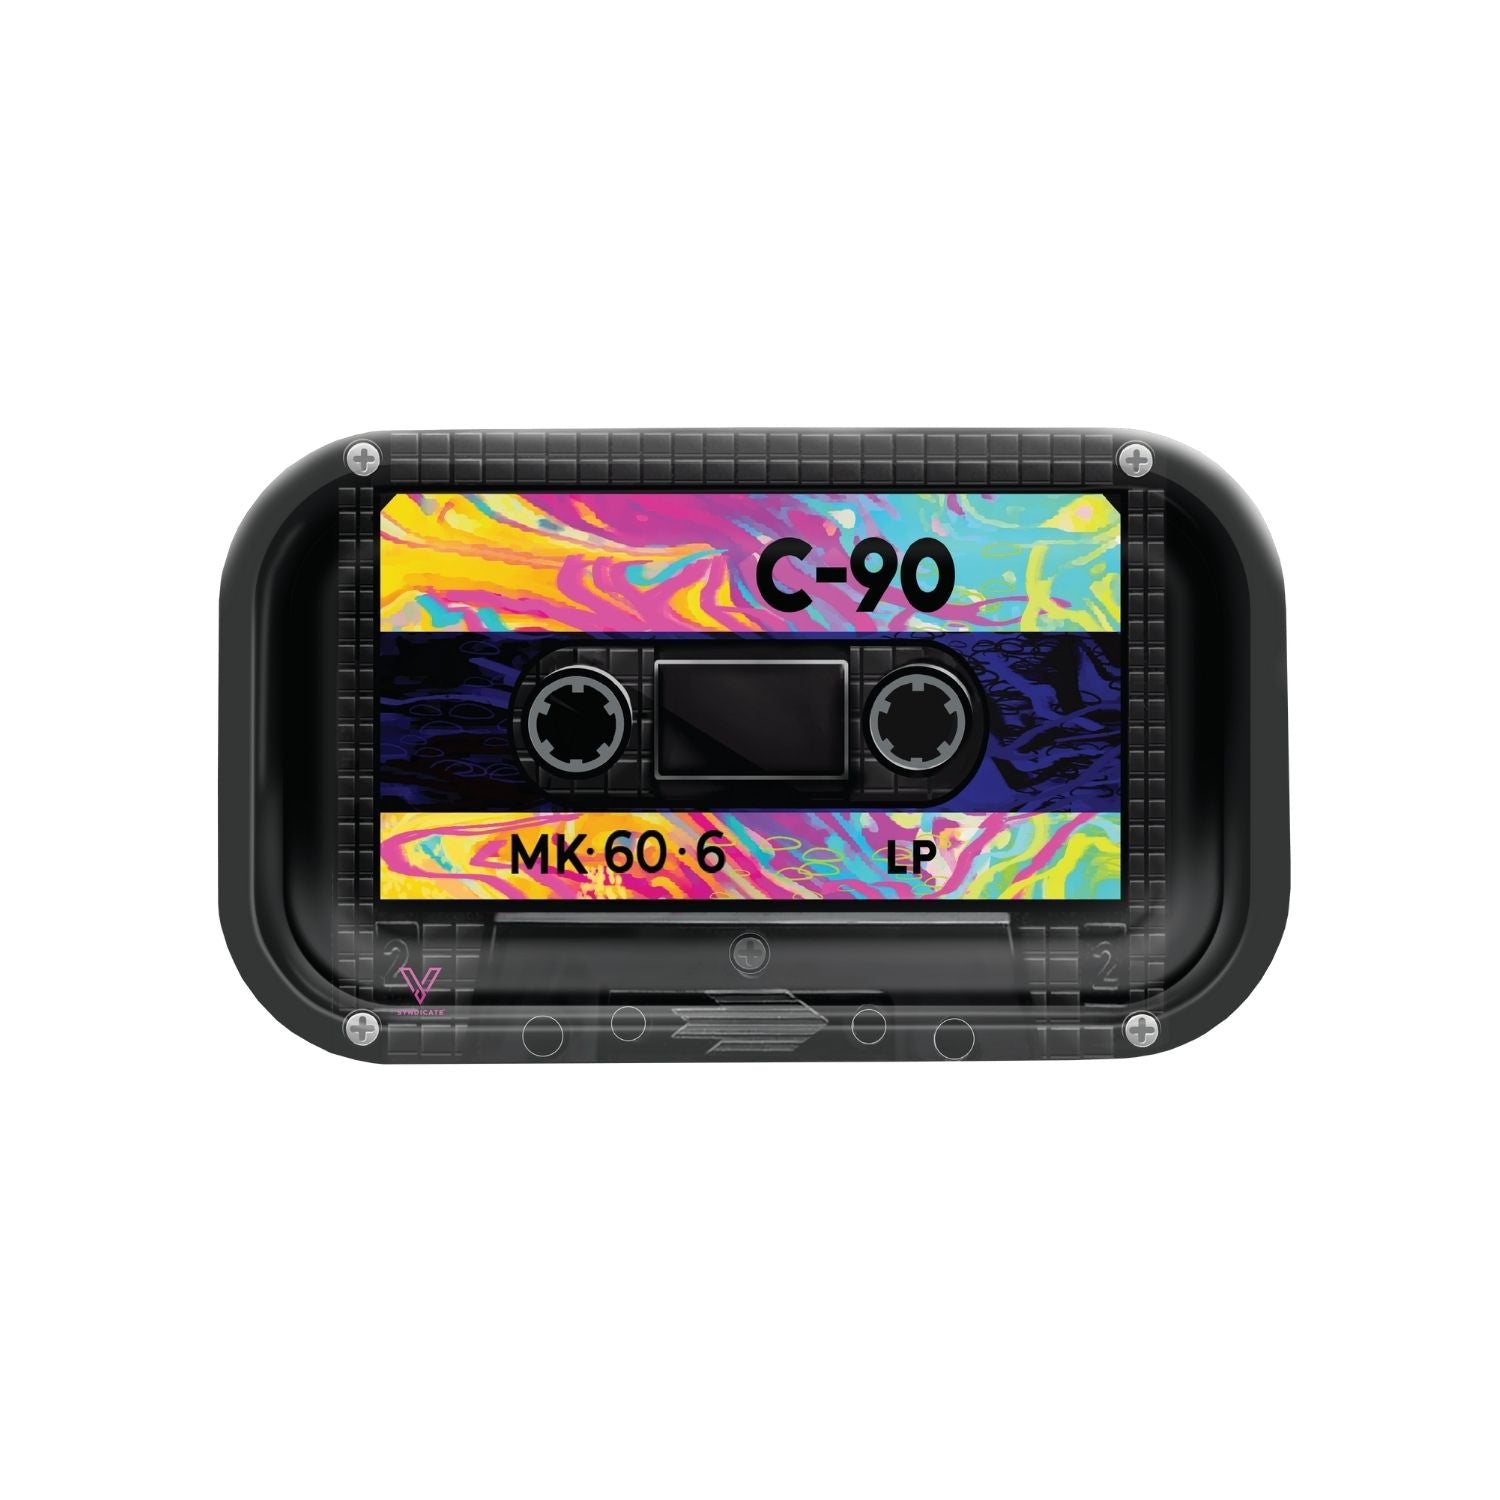 Cassette Metal Rolling Tray - INHALCO